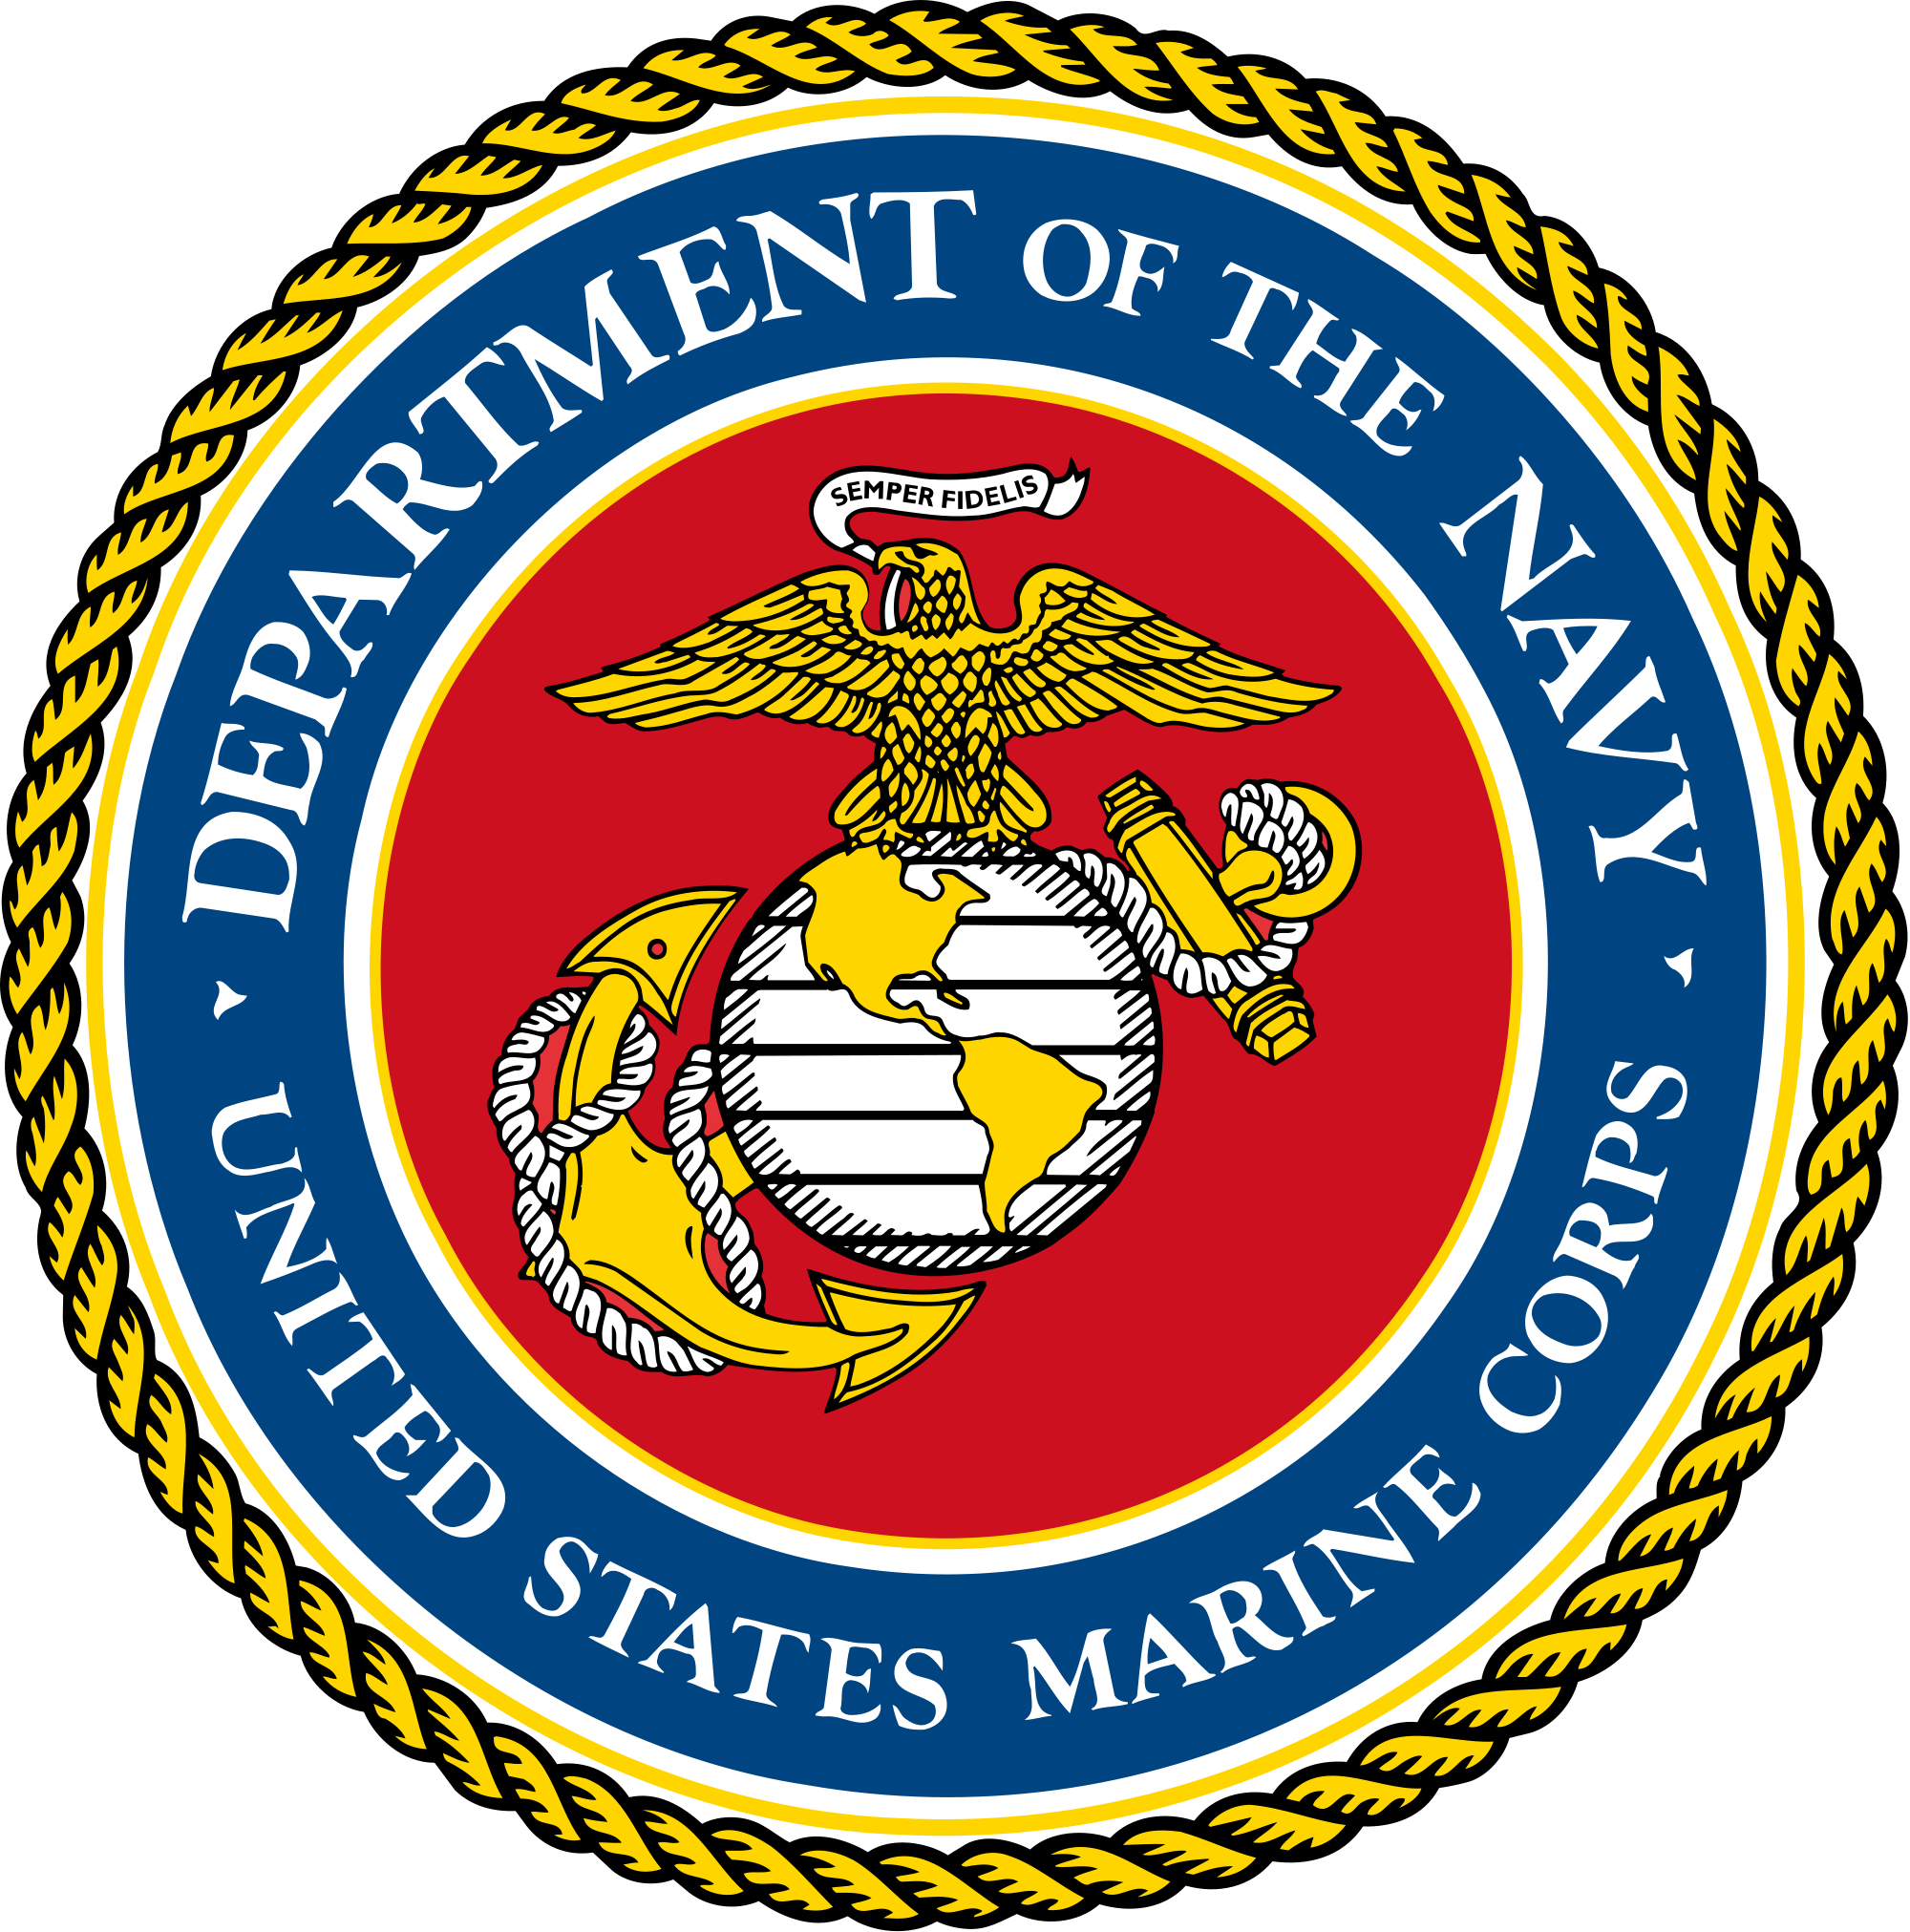 Culture of the United States Marine Corps - Wikipedia, the free ...